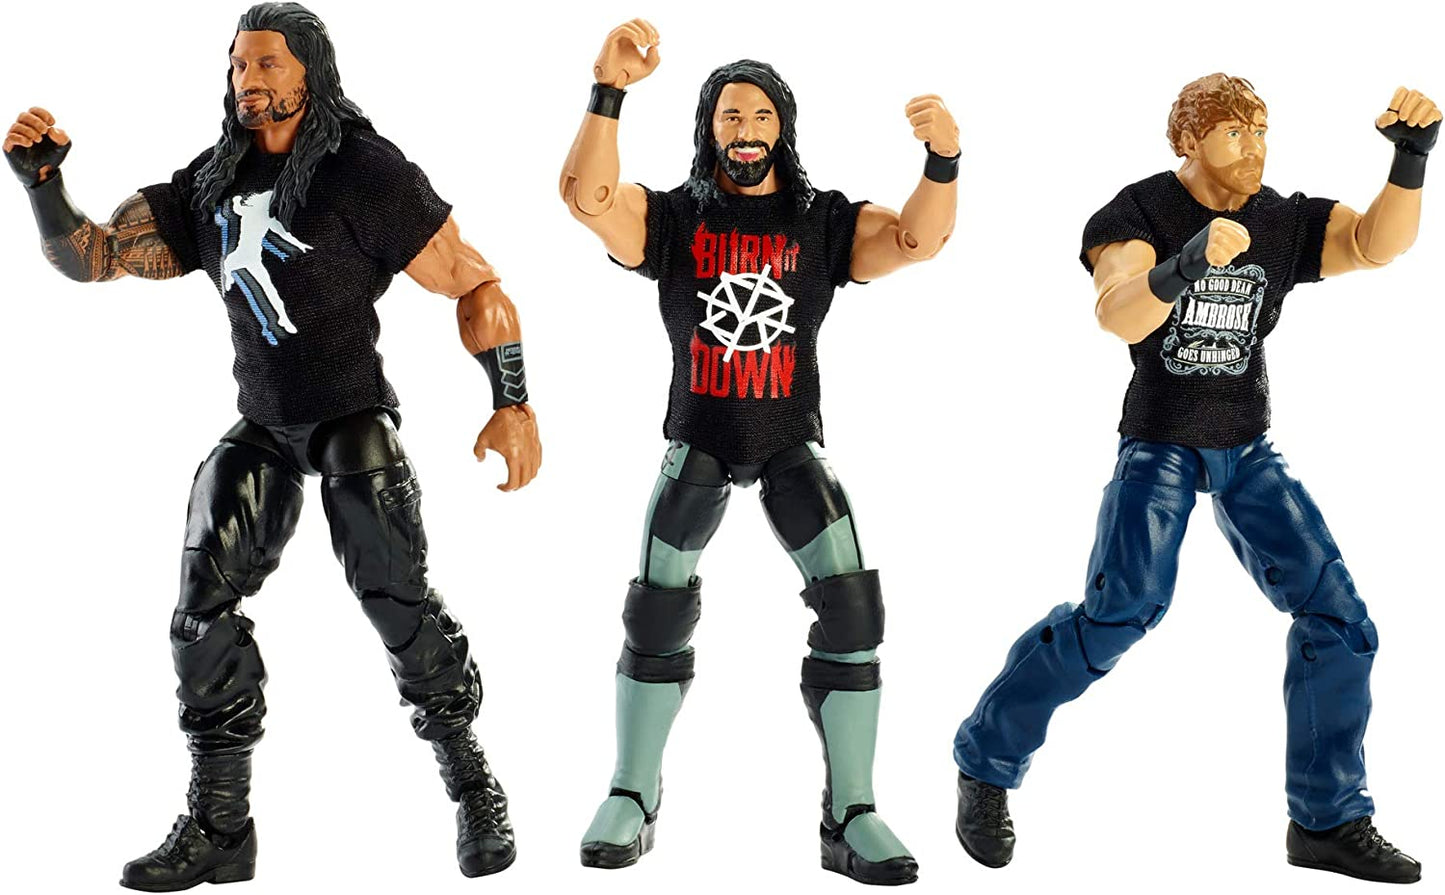 2018 WWE Mattel Elite Collection Epic Moments The Hounds of Justice: Dean Ambrose, Roman Reigns & Seth Rollins